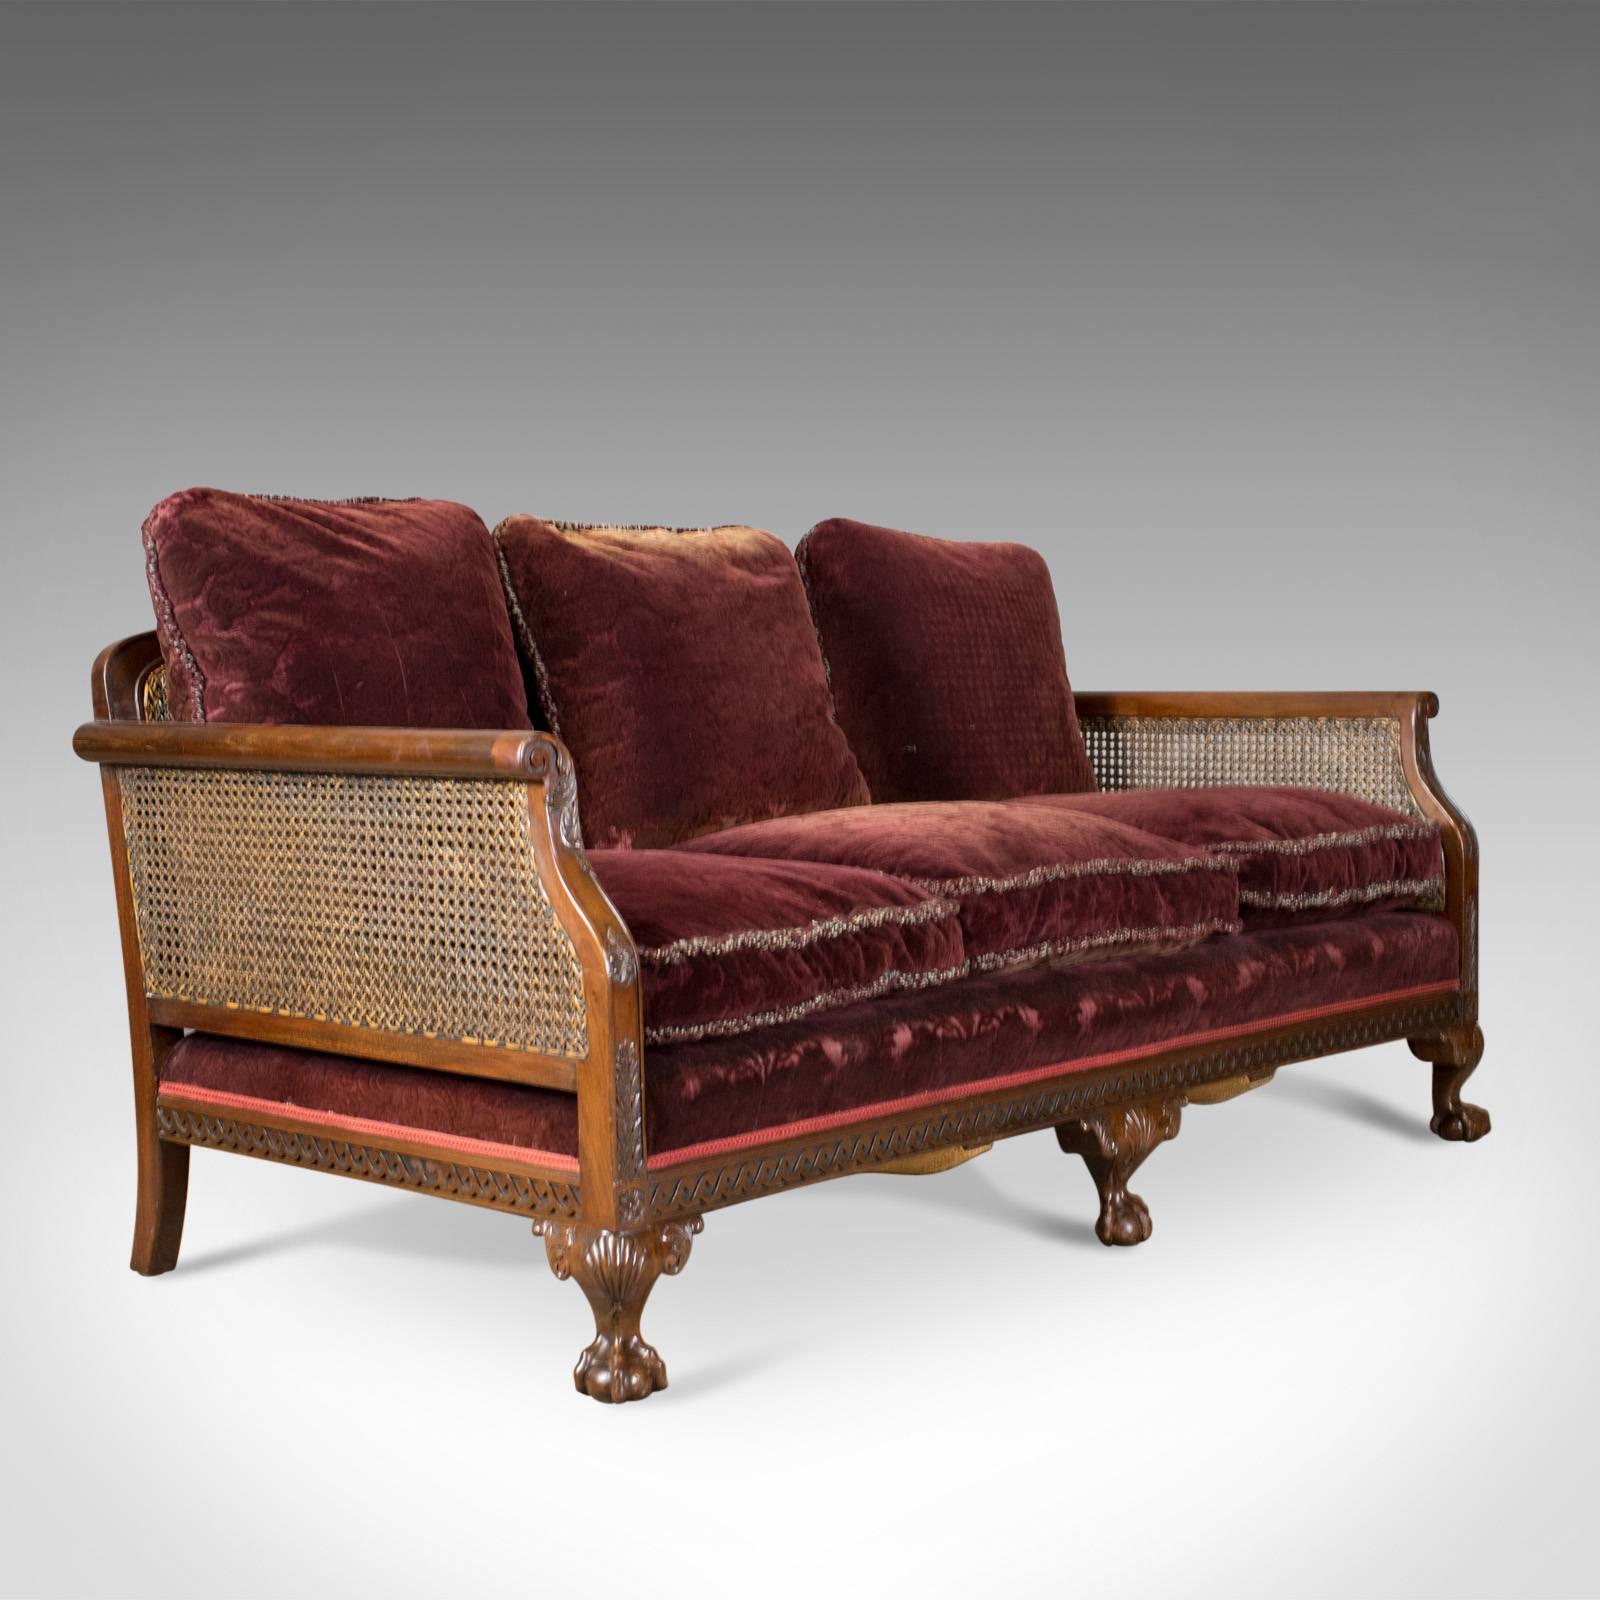 This is a classic antique conservatory suite, a bergère sofa and chairs dating to the Edwardian period of the early 20th century, circa 1910.

Beautifully crafted in mahogany with good color and graining
Deep seat enclosed with traditional